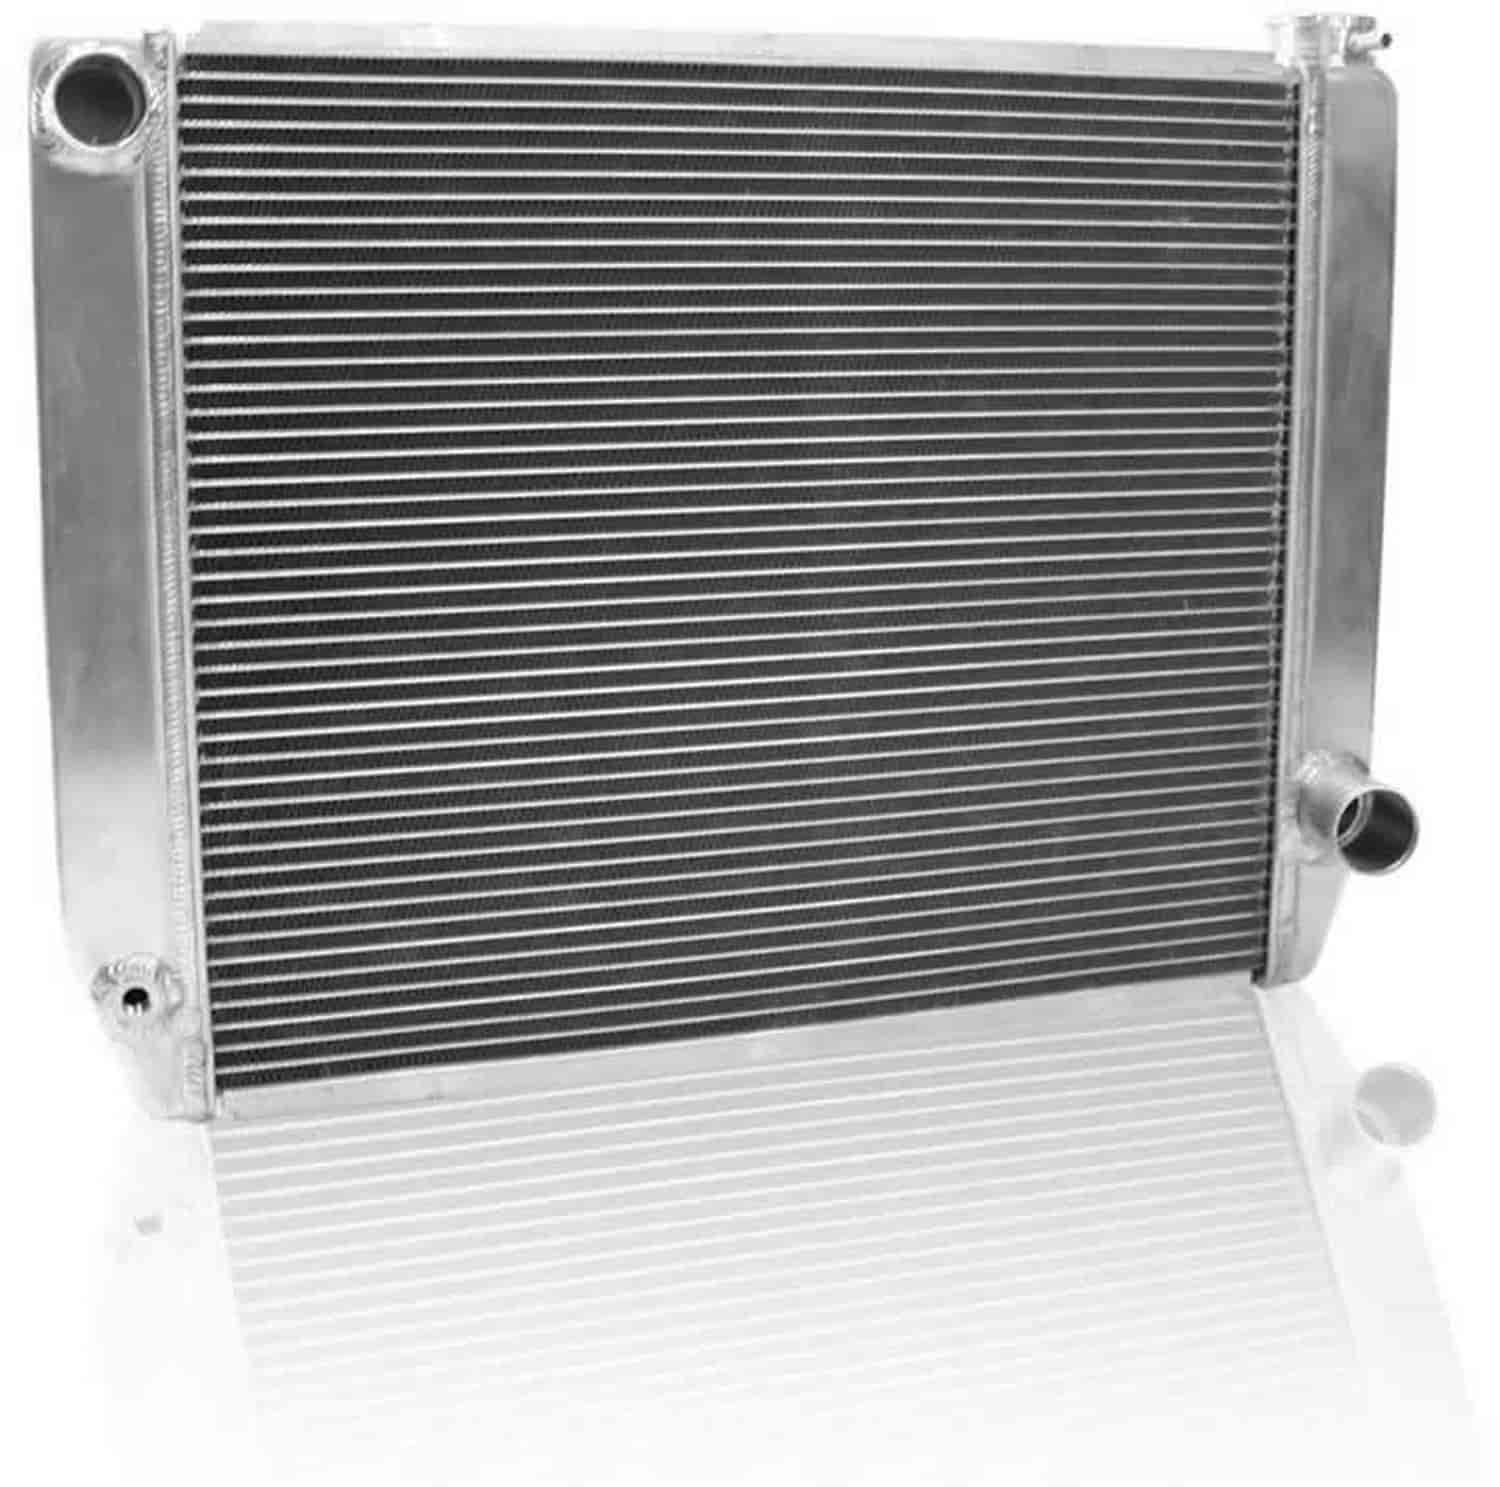 ClassicCool Universal Fit Radiator Single Pass Crossflow Design 26" x 19" with Straight Outlet